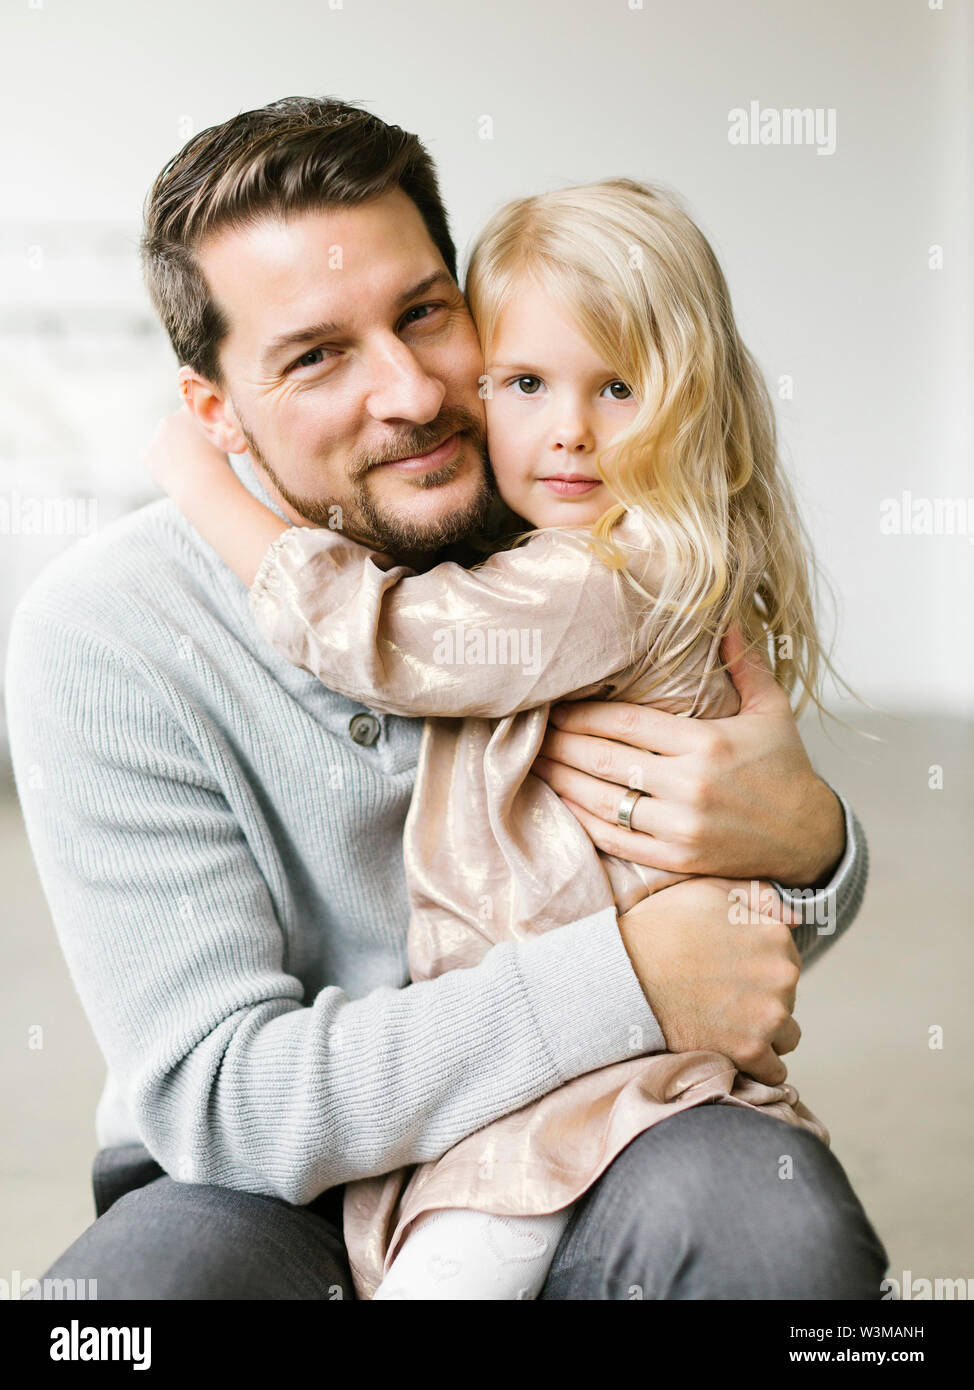 Girl sitting on her father's lap Stock Photo